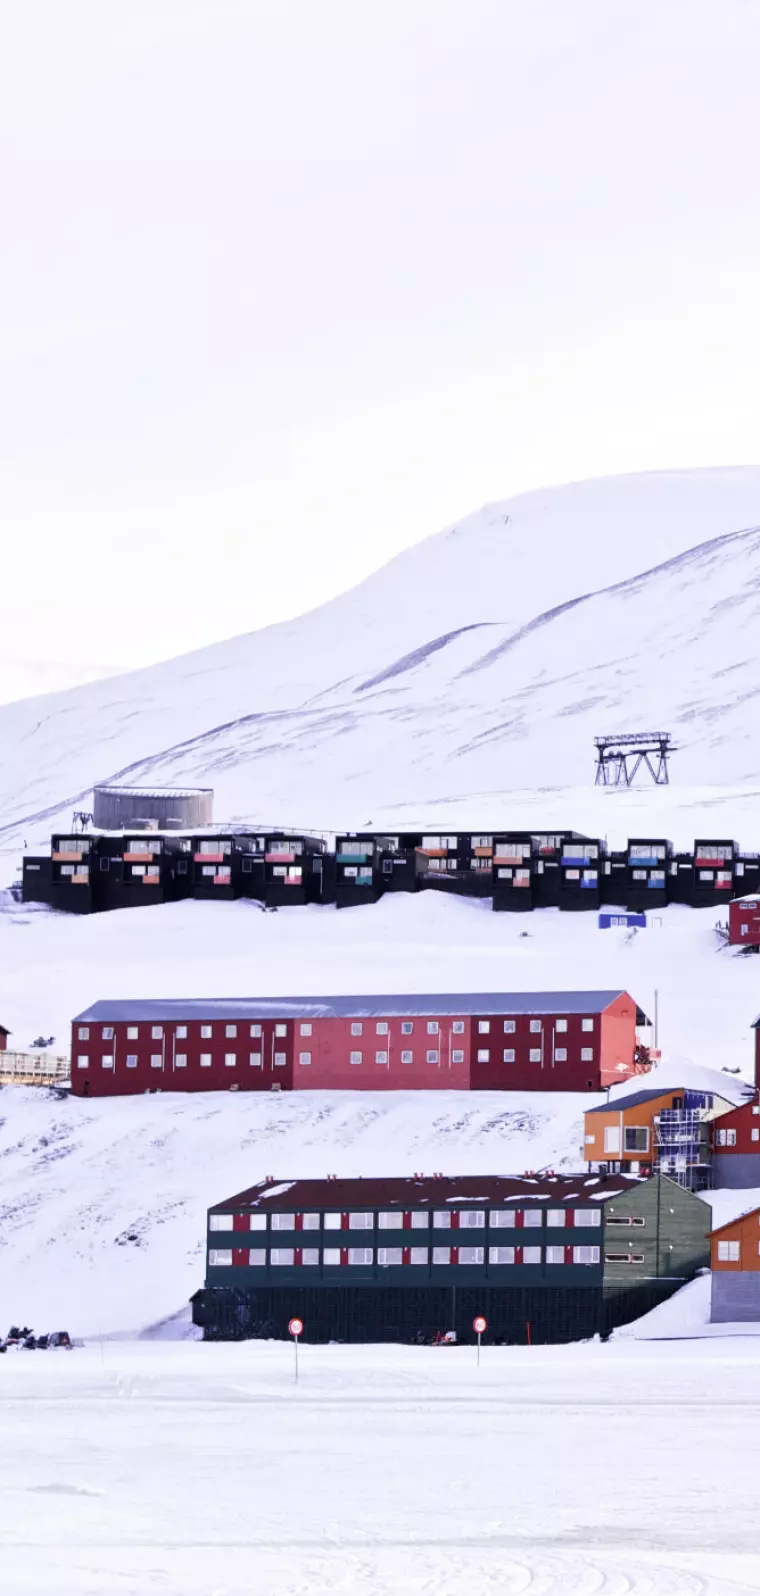 The,Colourful,Houses,Of,The,Town,Of,Longyearbyen,,The,Largest